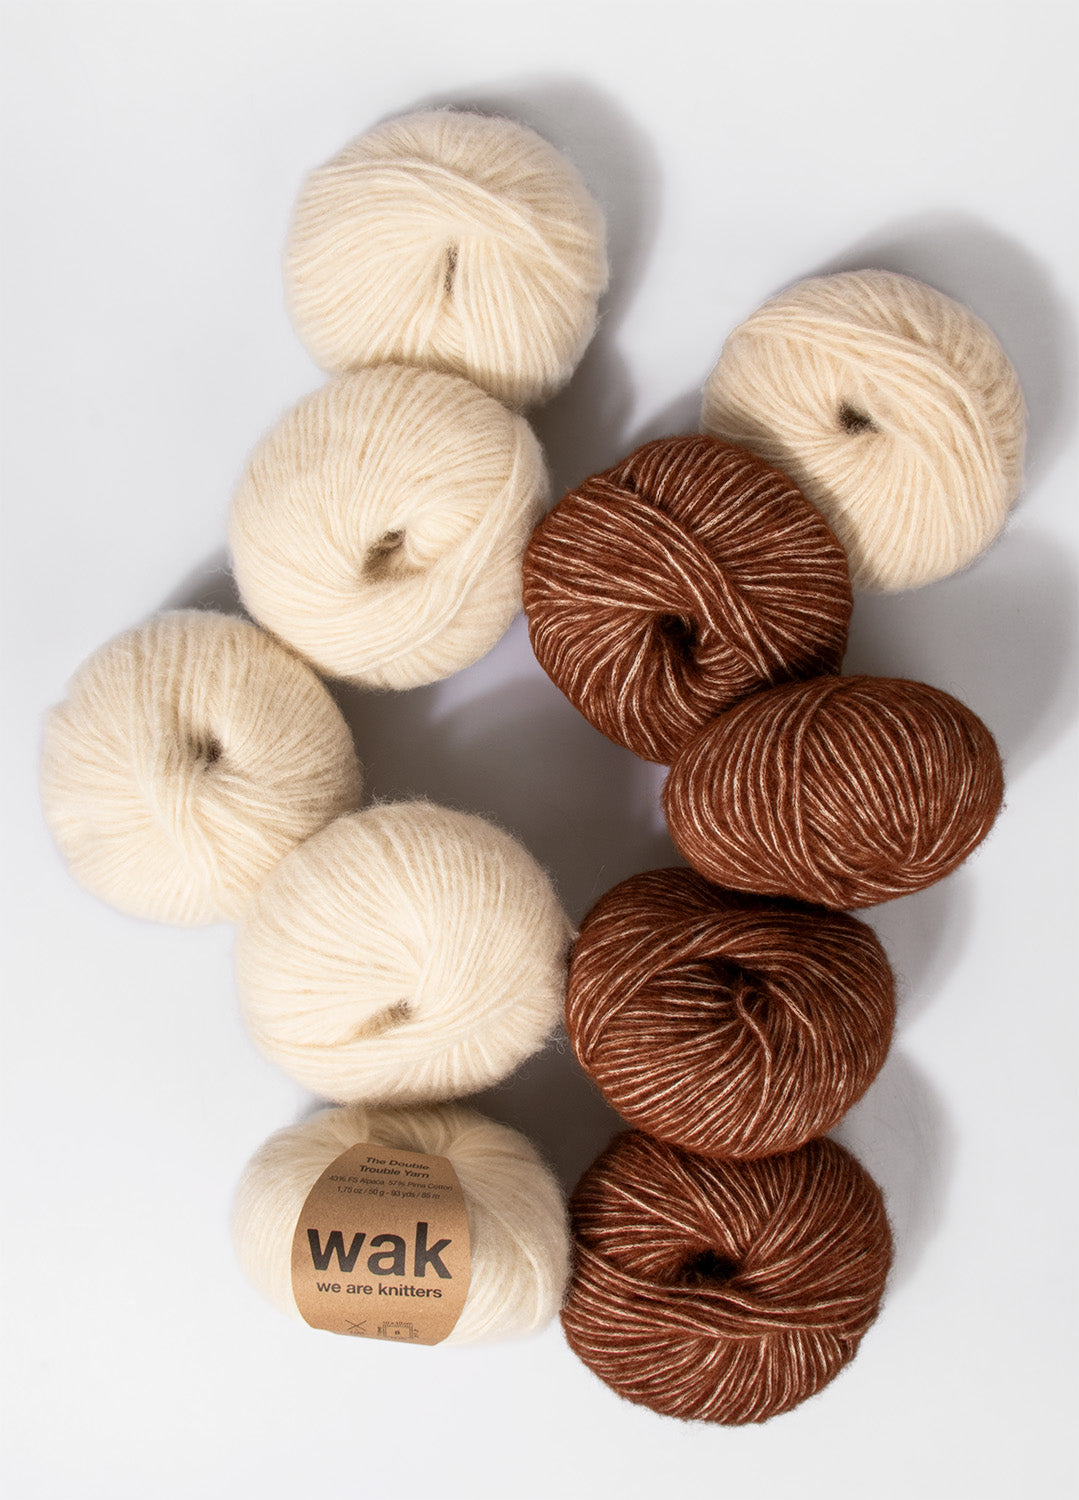 10 Pack of Double Trouble Yarn Balls